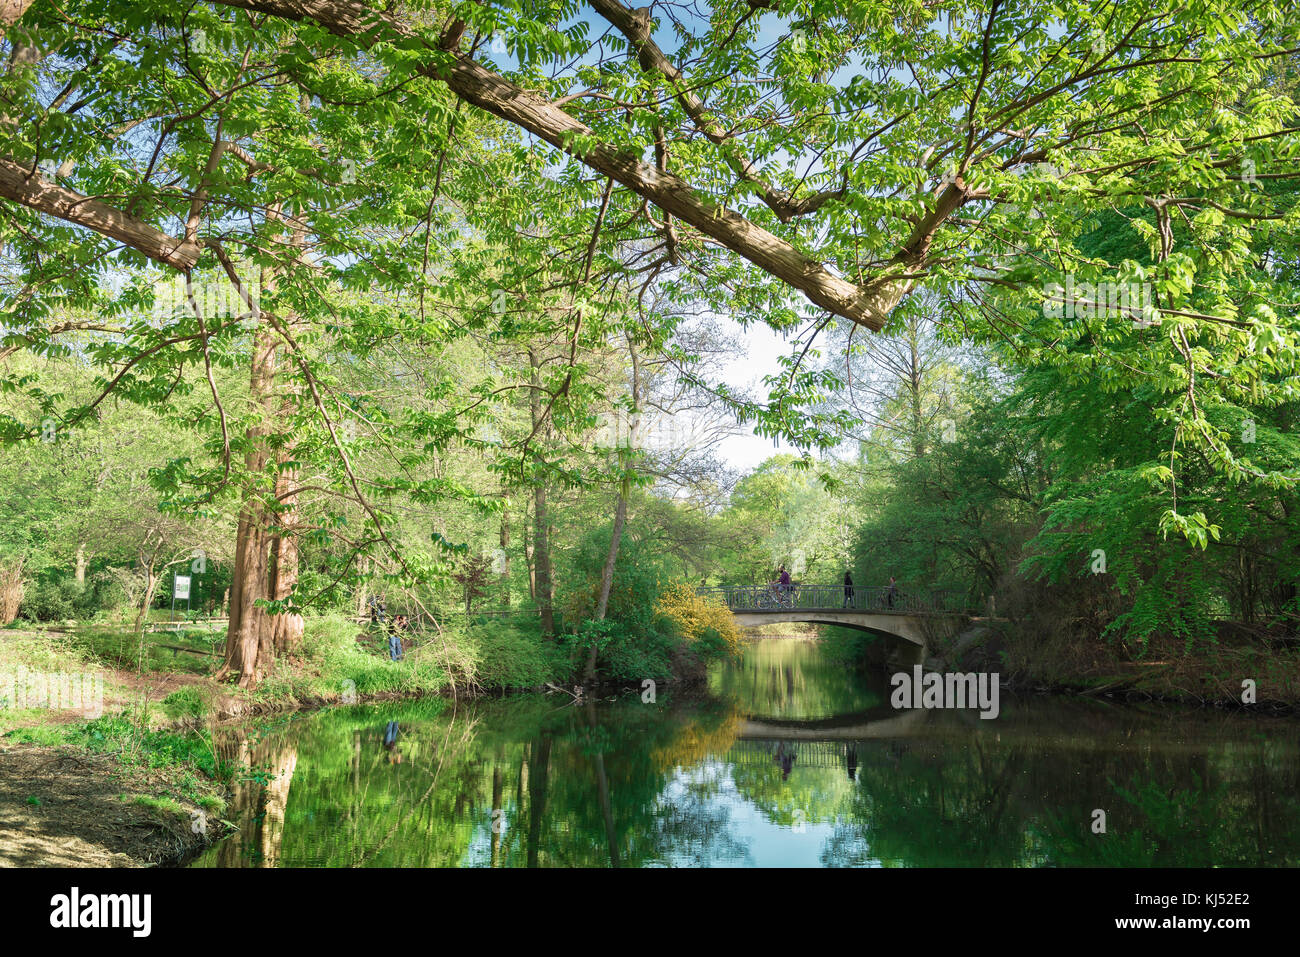 Tiergarten Berlin, view of a lake in the centre of the Tiergarten park at spring time, Berlin, Germany. Stock Photo